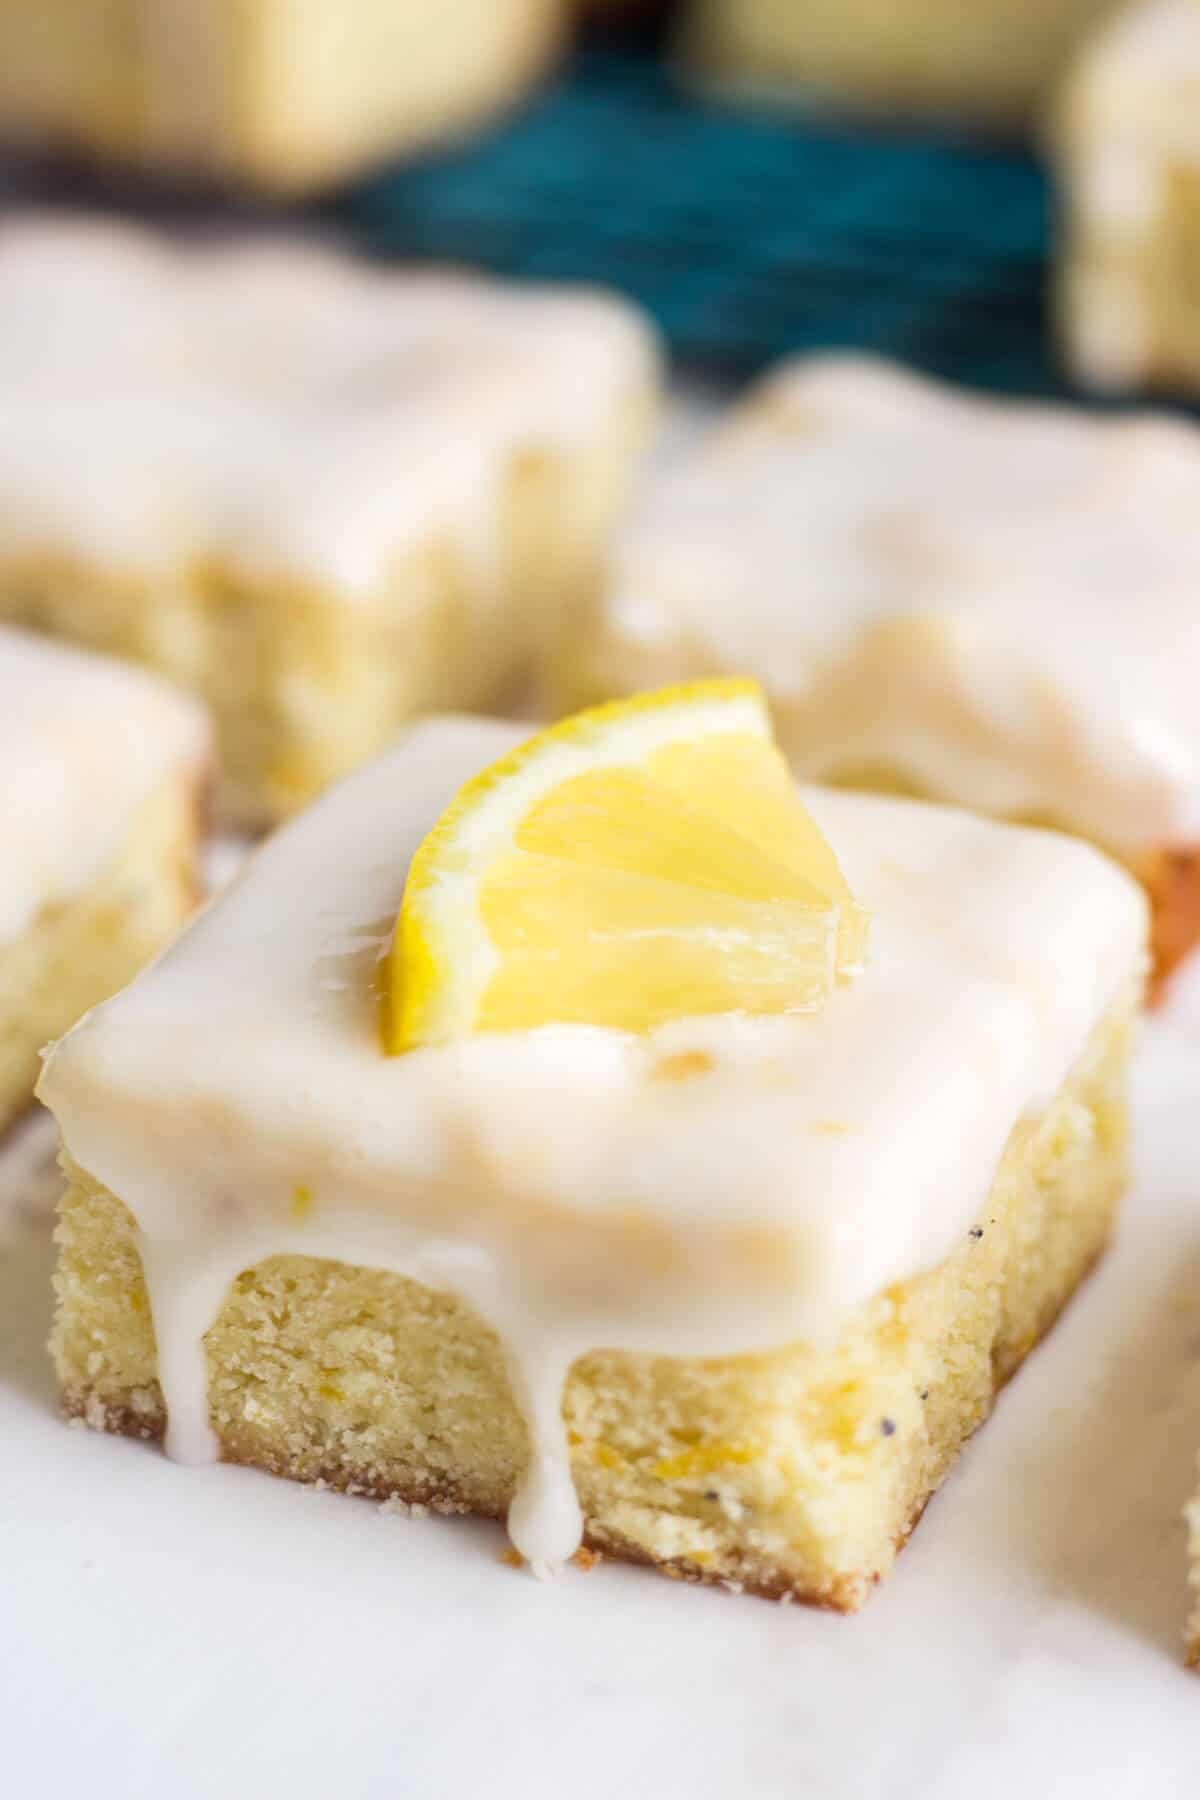 These glazed lemon poppy seed bars are a zingy lemon dessert! These bars are easy to make and are packed with some serious spring flavor. The lemon glaze will leave you wanting more.